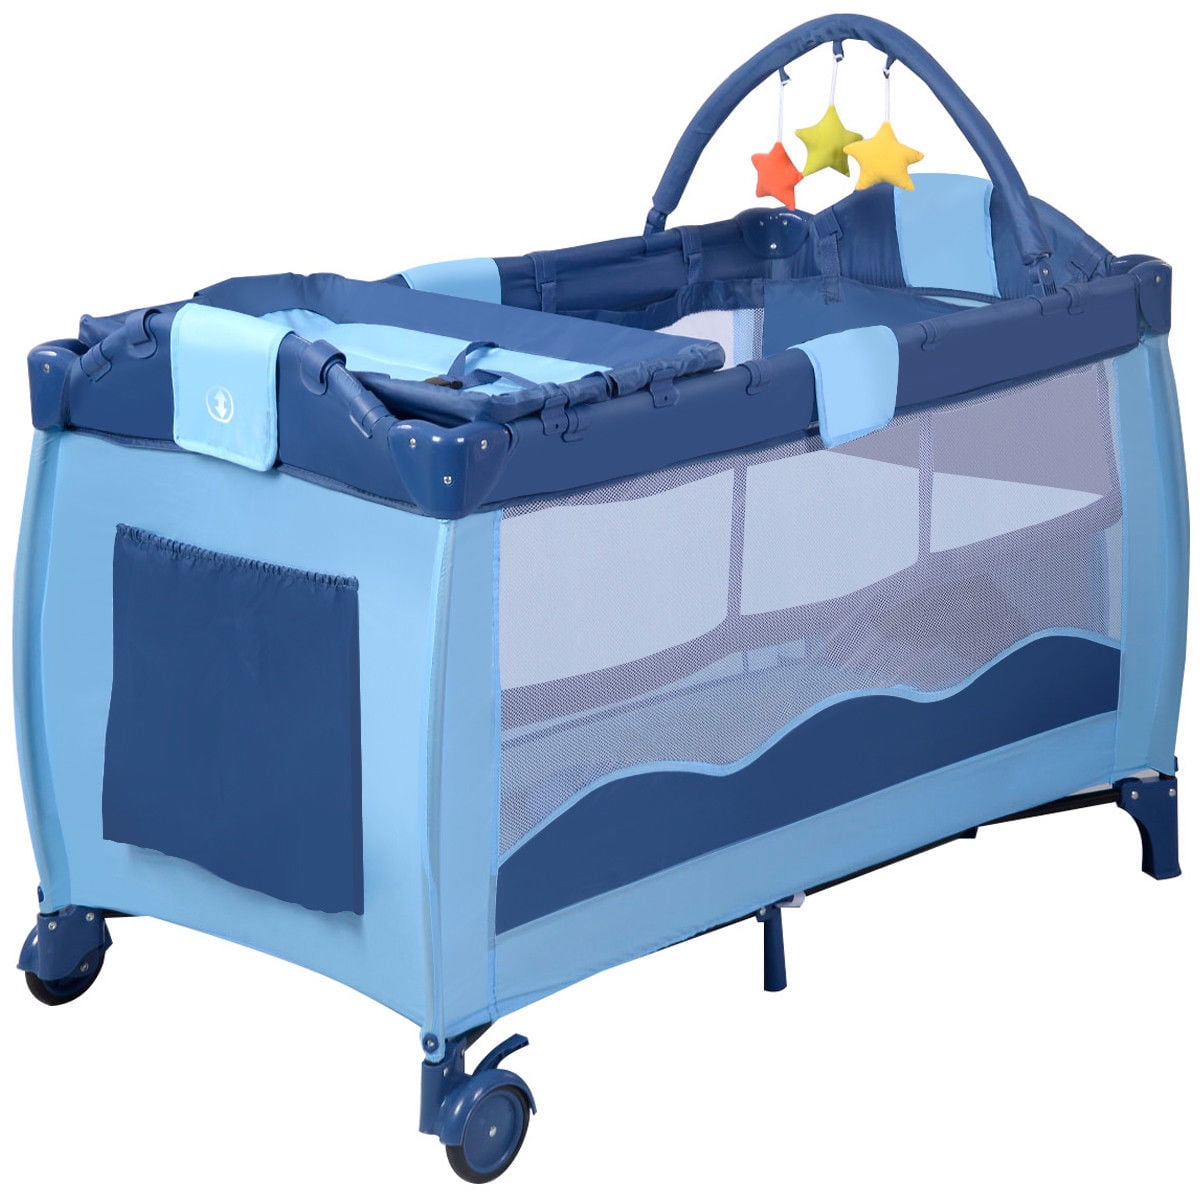 Portable Baby Crib Playpen Playard Pack Travel Infant Bassinet Bed 4 color New 